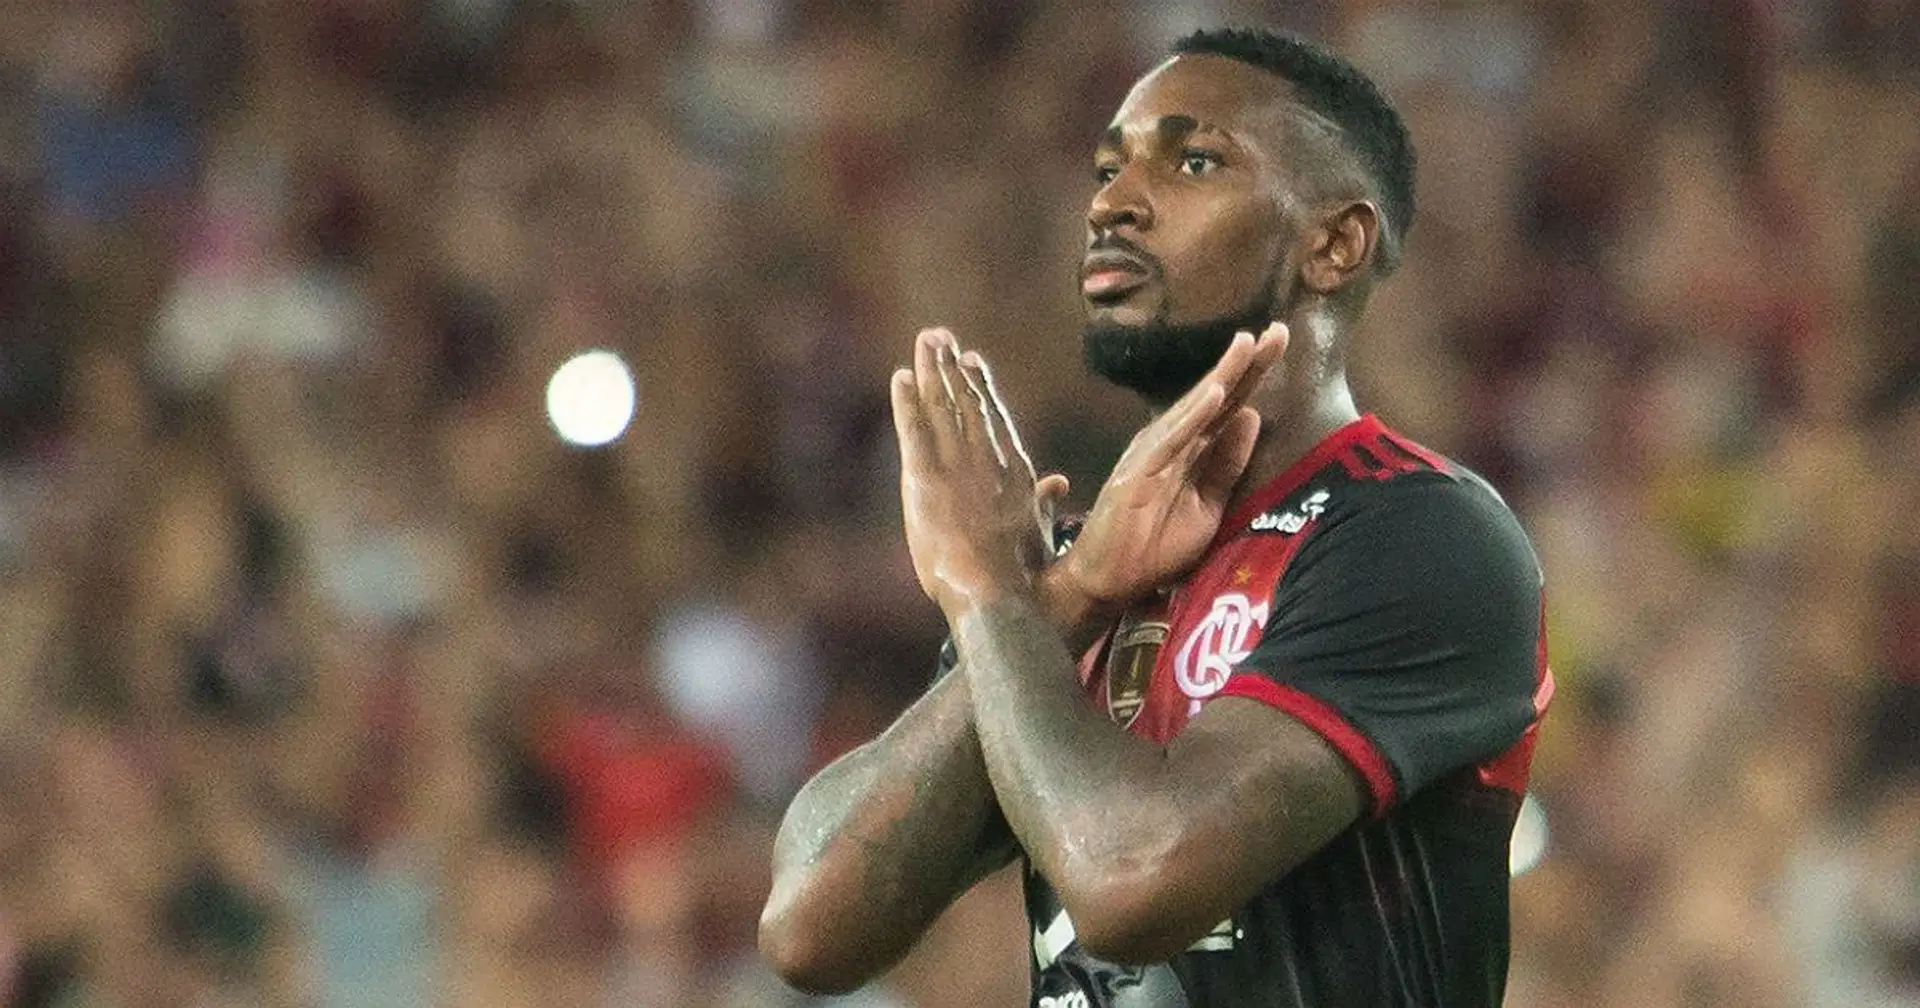 Marina Granovskaia 'looking to complete deal' for Brazilian midfielder Gerson with Chelsea named as 'leading candidate' to sign Flamengo star